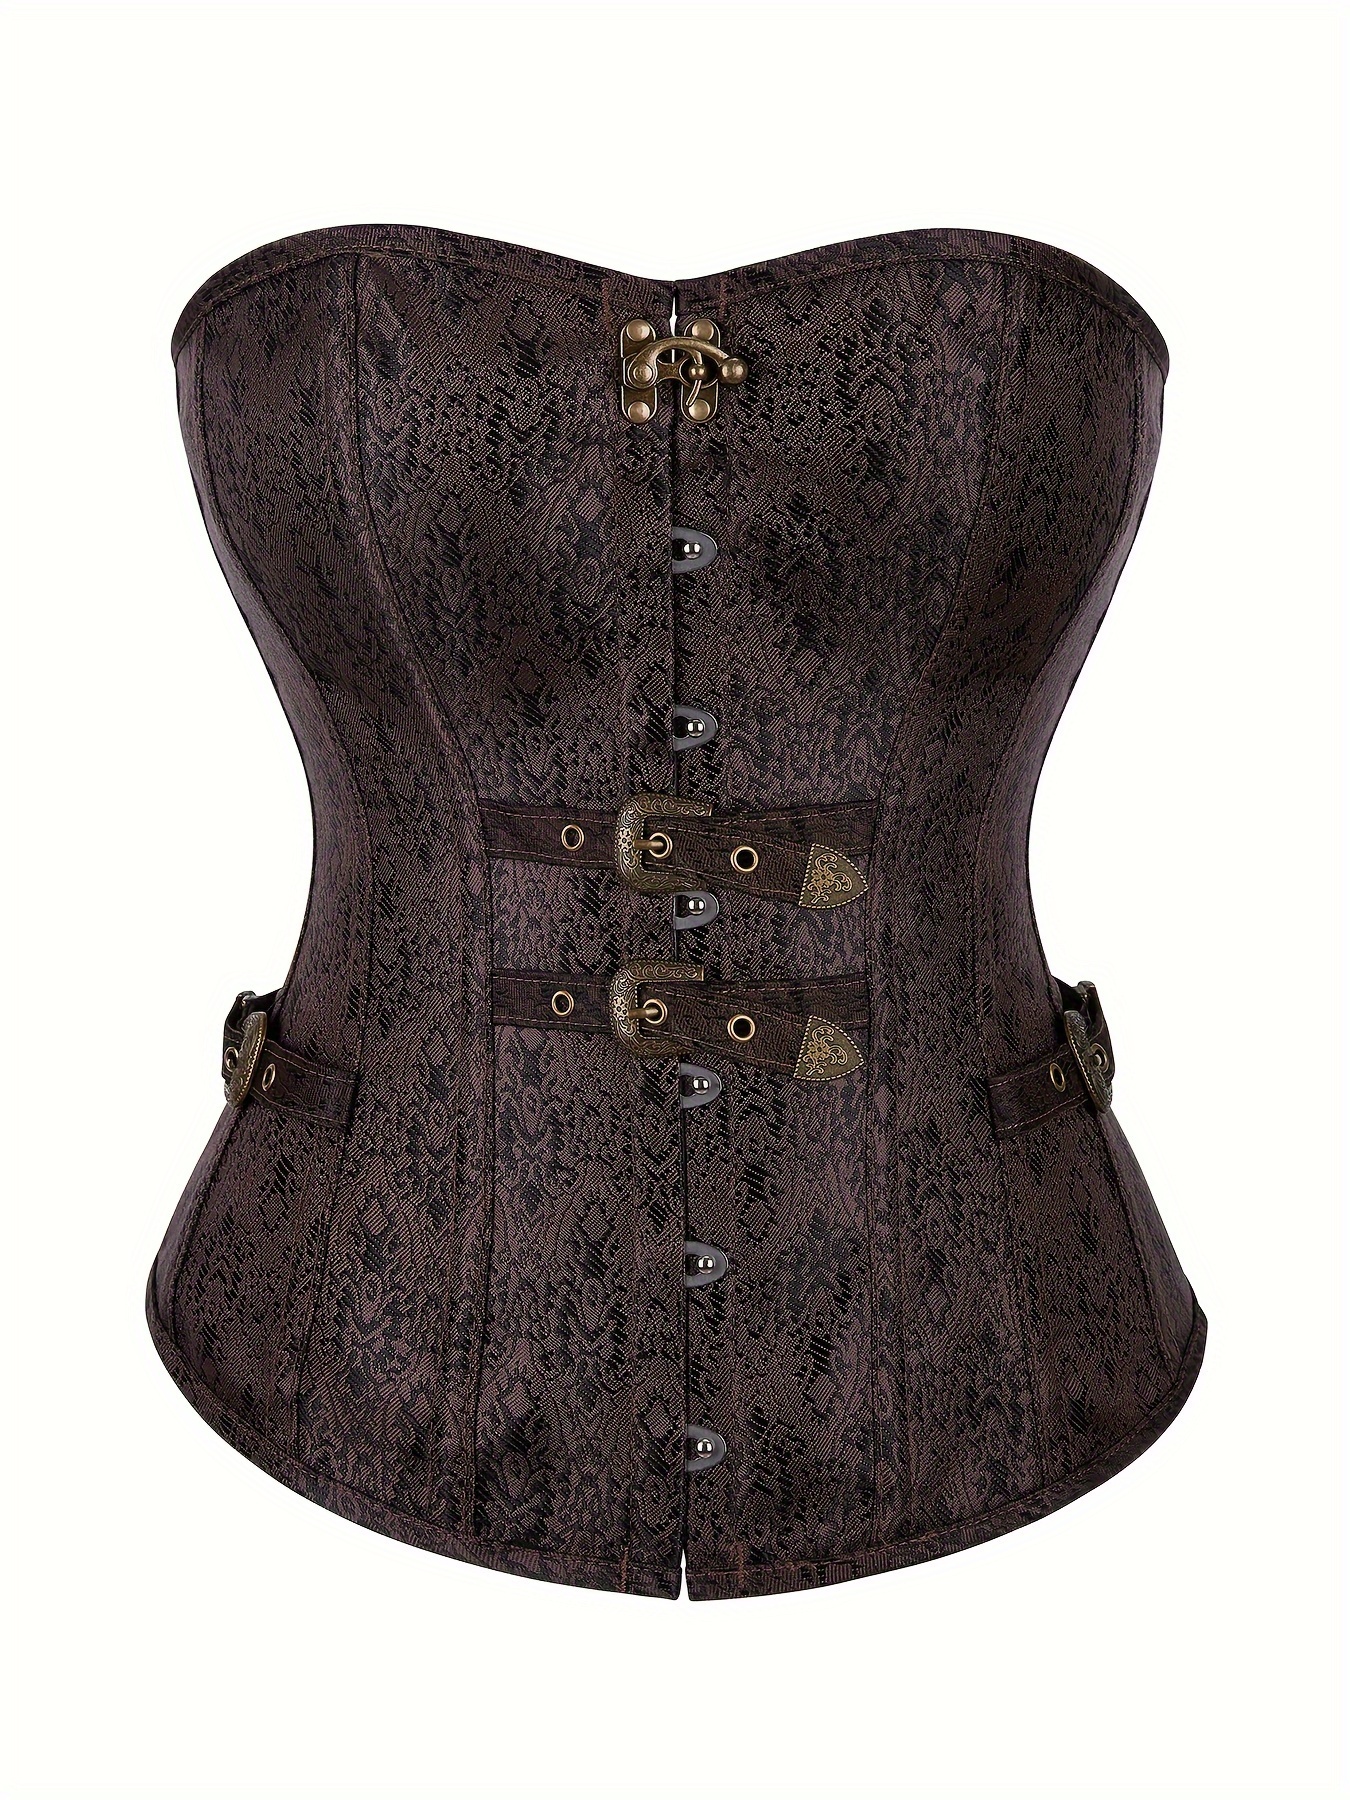 Stunning Brocade Corset Top, Slimming Sweetheart Bust Baroque Style Corset  With Lace Up & Zip Detail, Women's Clothing